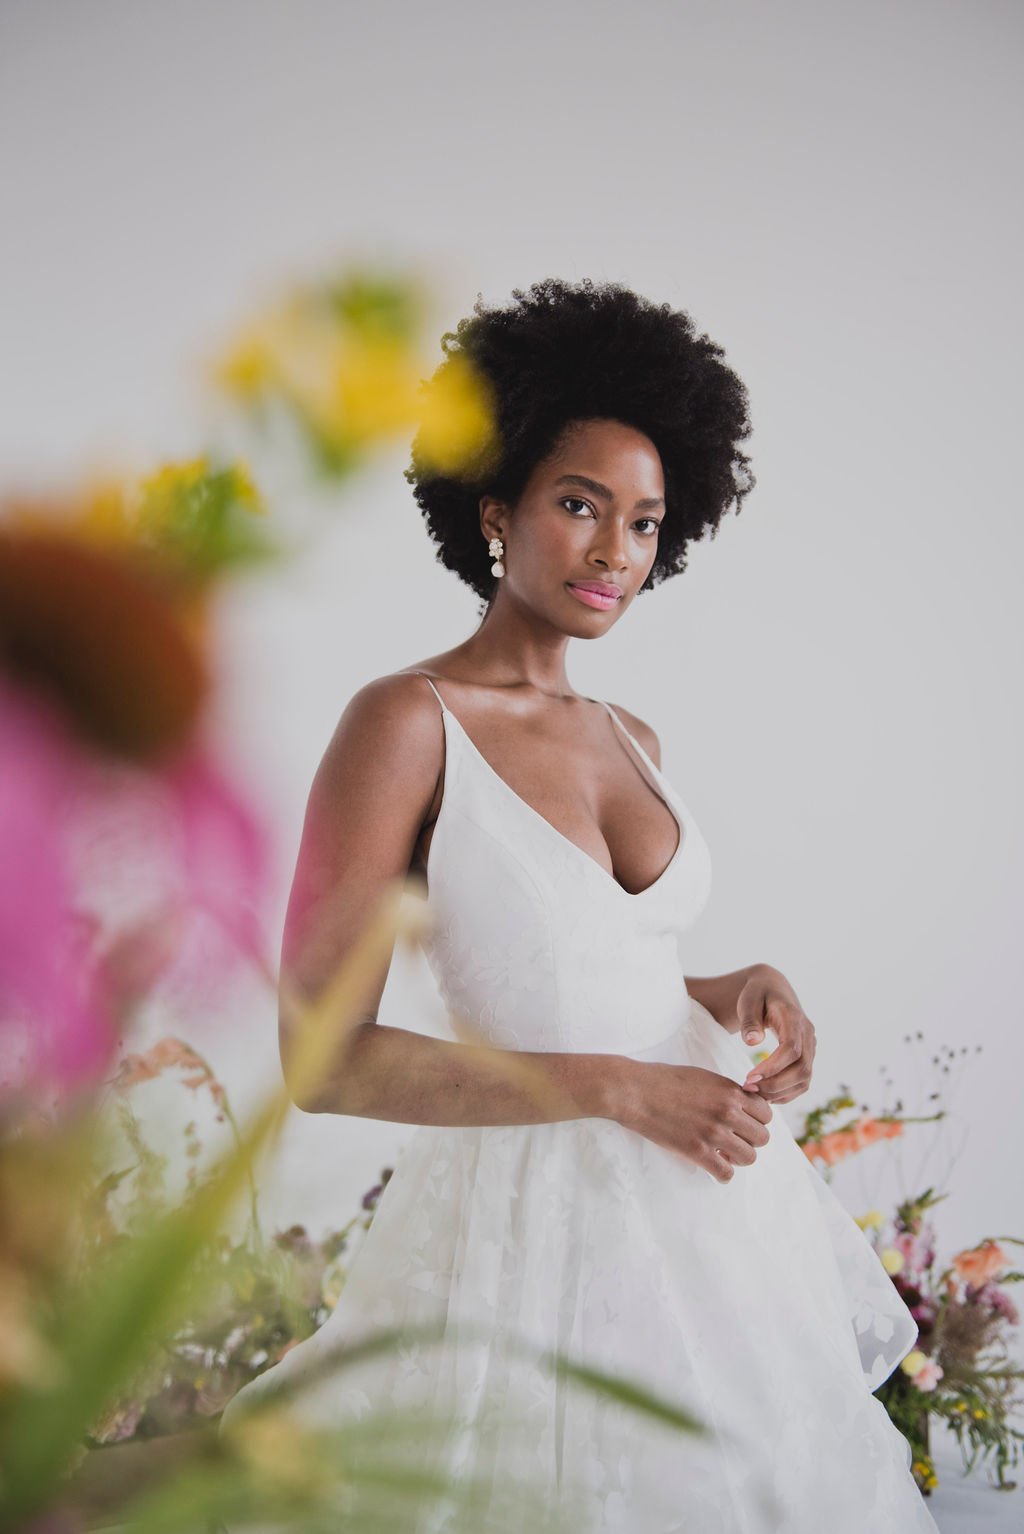 Floral Sustainable Wedding Gown with Ruffle Skirt – Natalie Gown